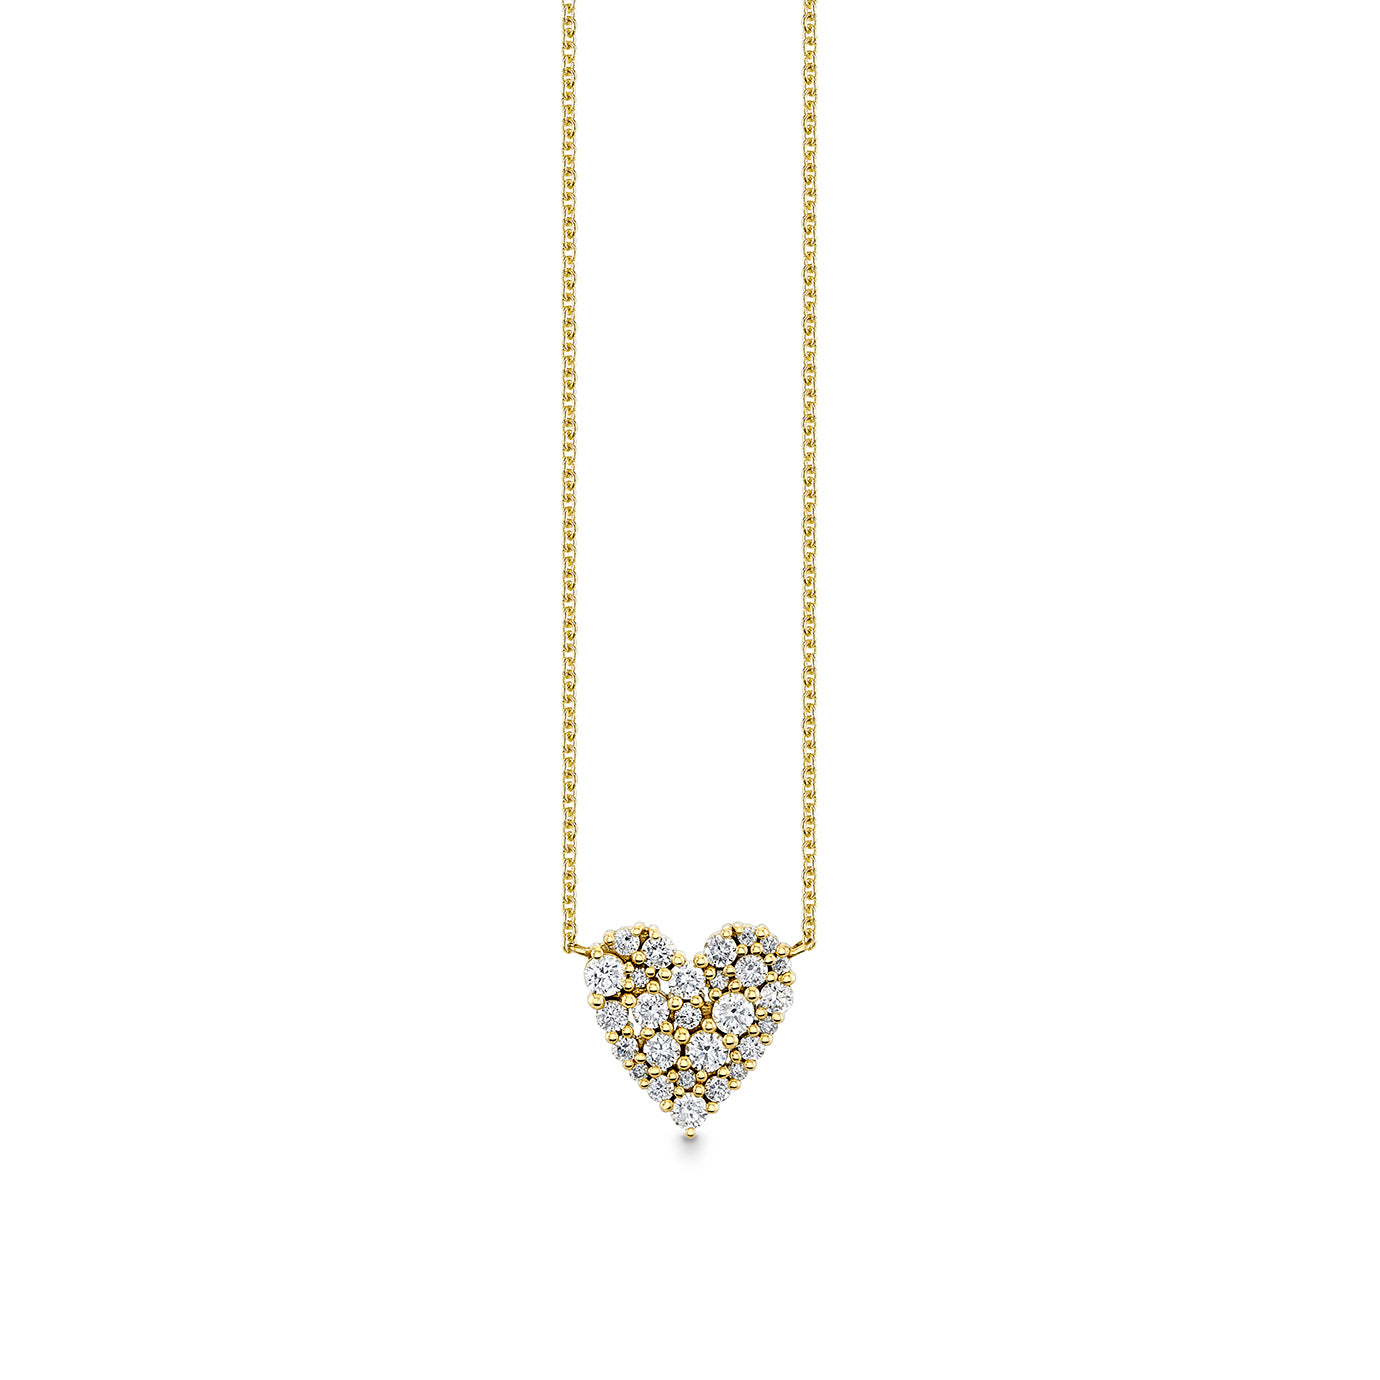 Alson Signature Collection 18K Rose Gold Heart Shaped Diamond Necklace